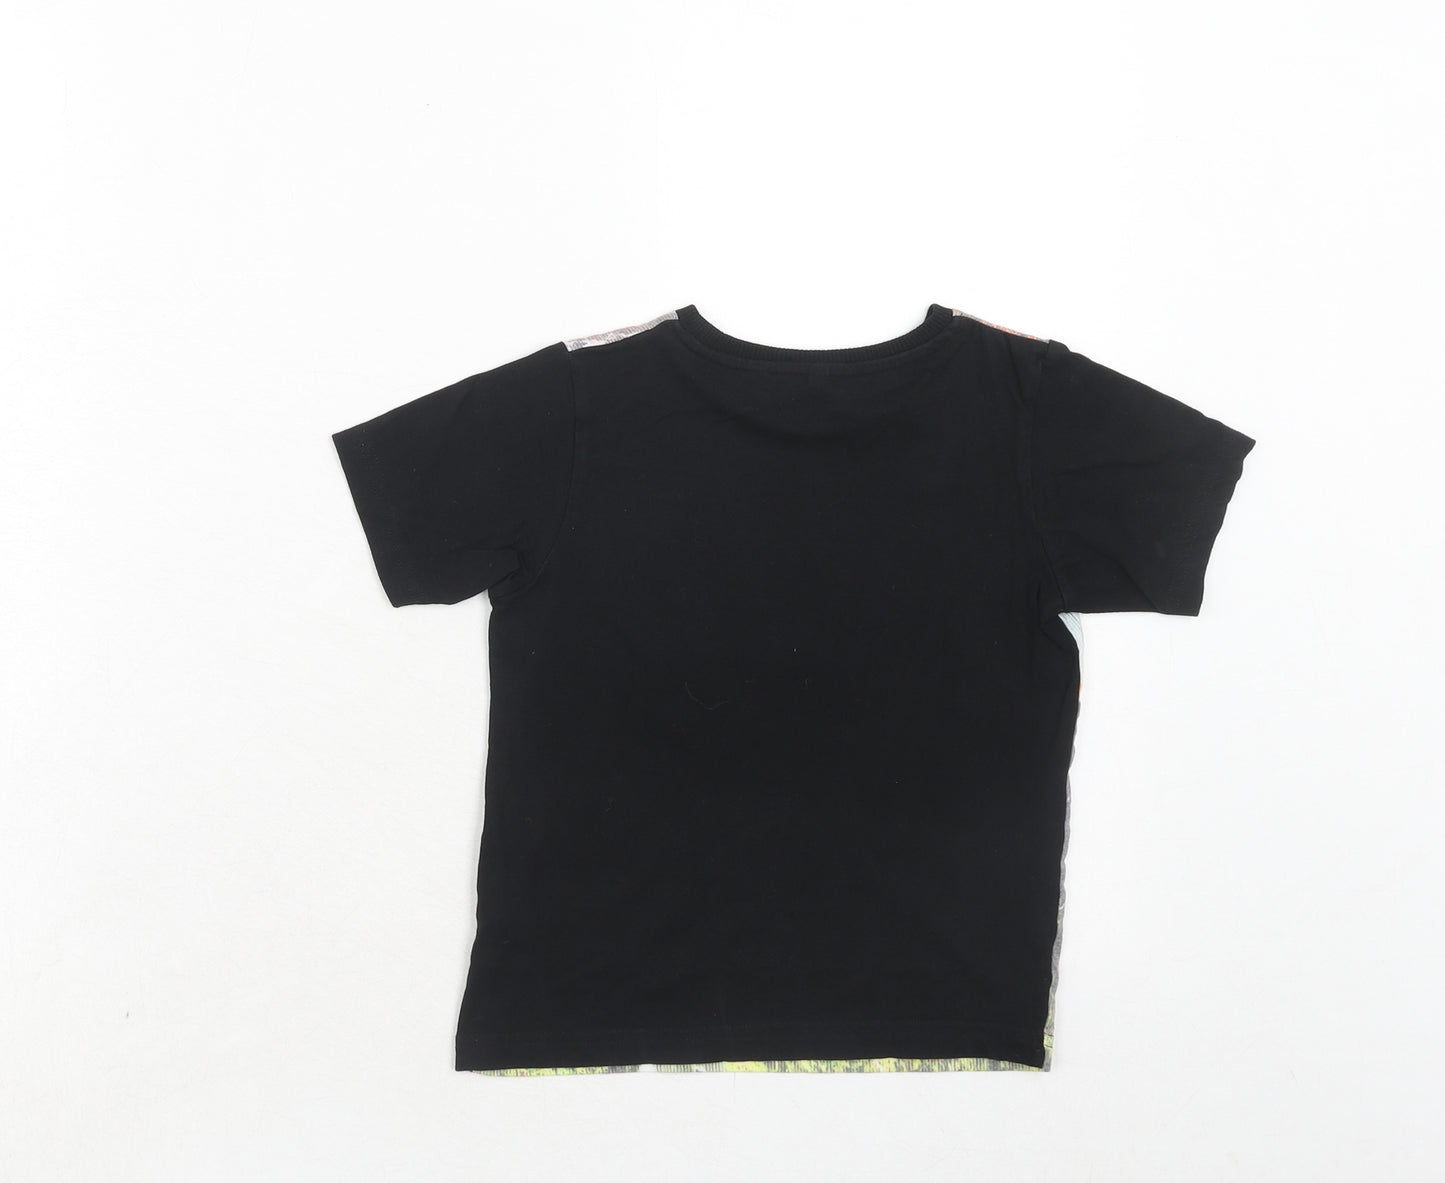 Marks and Spencer Boys Black Colourblock Cotton Basic T-Shirt Size 3-4 Years Round Neck Pullover - Dinosaur